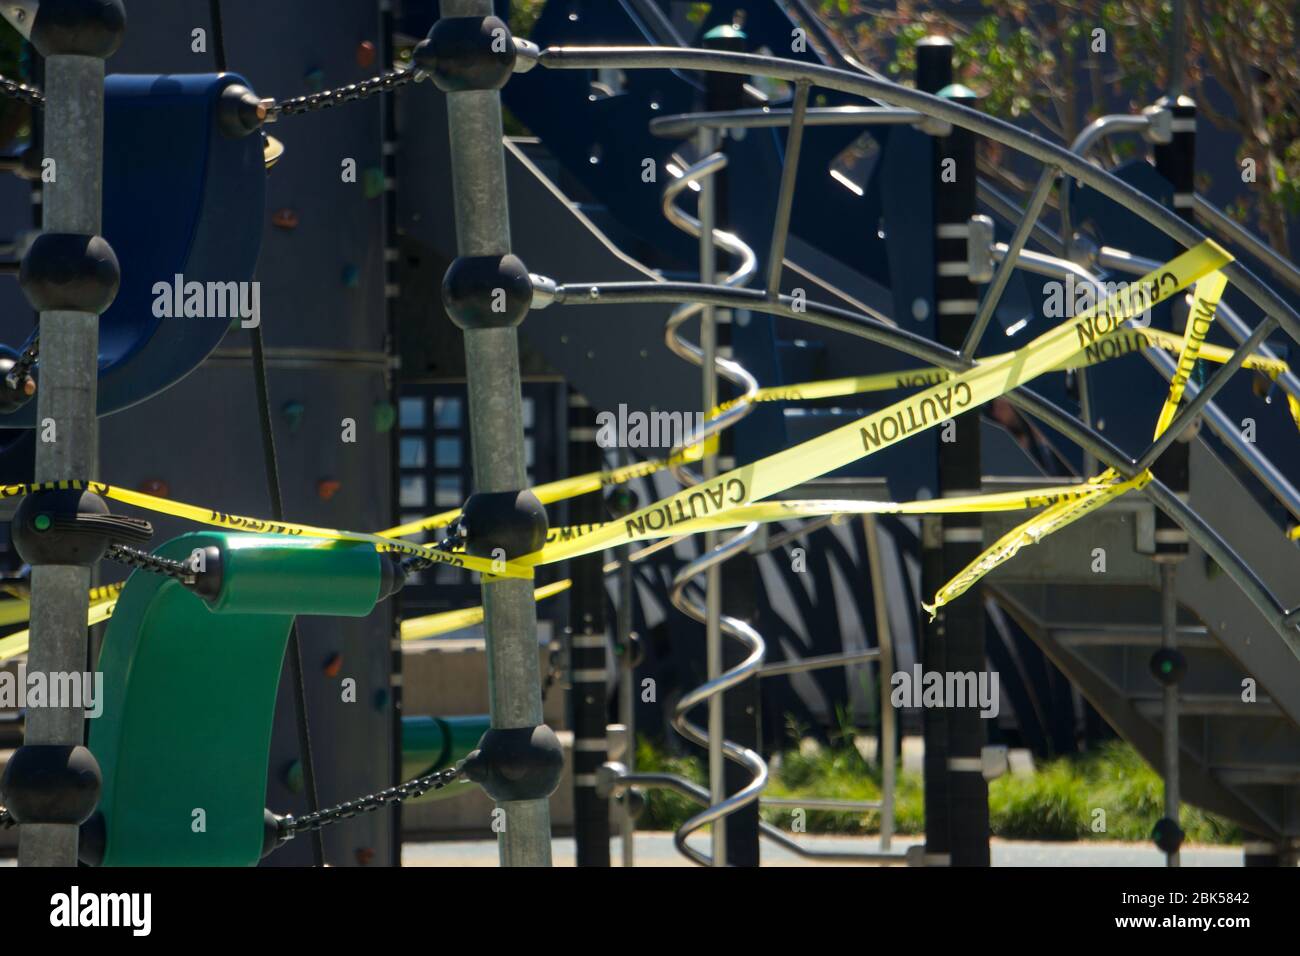 Closed city park and off limits playground covered in yellow caution tape due to Coronavirus COVID19 outbreak. Doyle Hollis Park, Emervyille, CA. Stock Photo